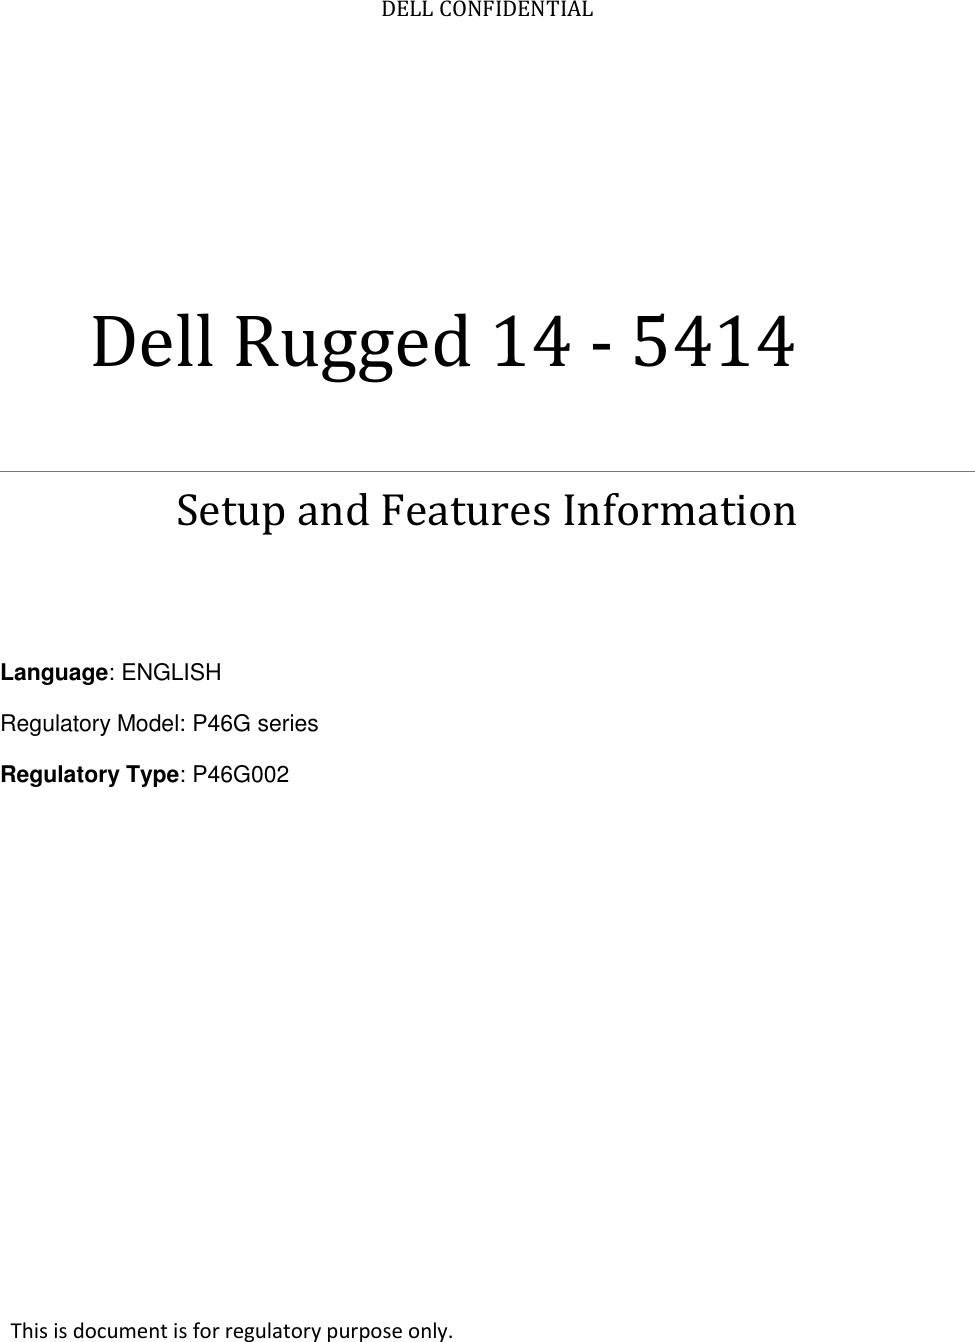    DELL CONFIDENTIAL Dell Rugged 14 - 5414Setup and Features Information    Language: ENGLISH Regulatory Model: P46G series Regulatory Type: P46G002      This is document is for regulatory purpose only. 